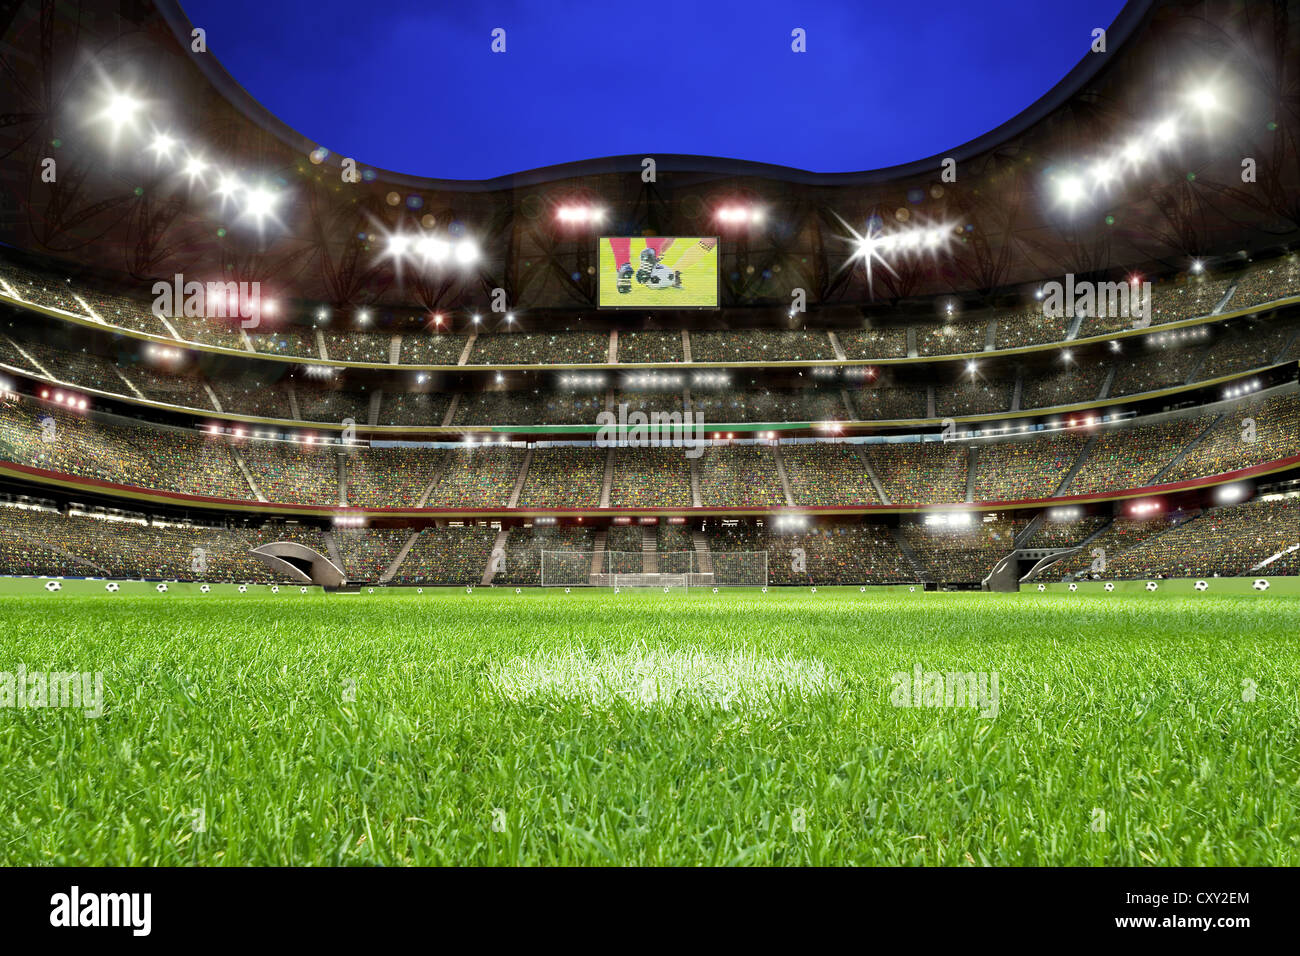 Soccer, soccer stadium, lawn, grand stand Stock Photo